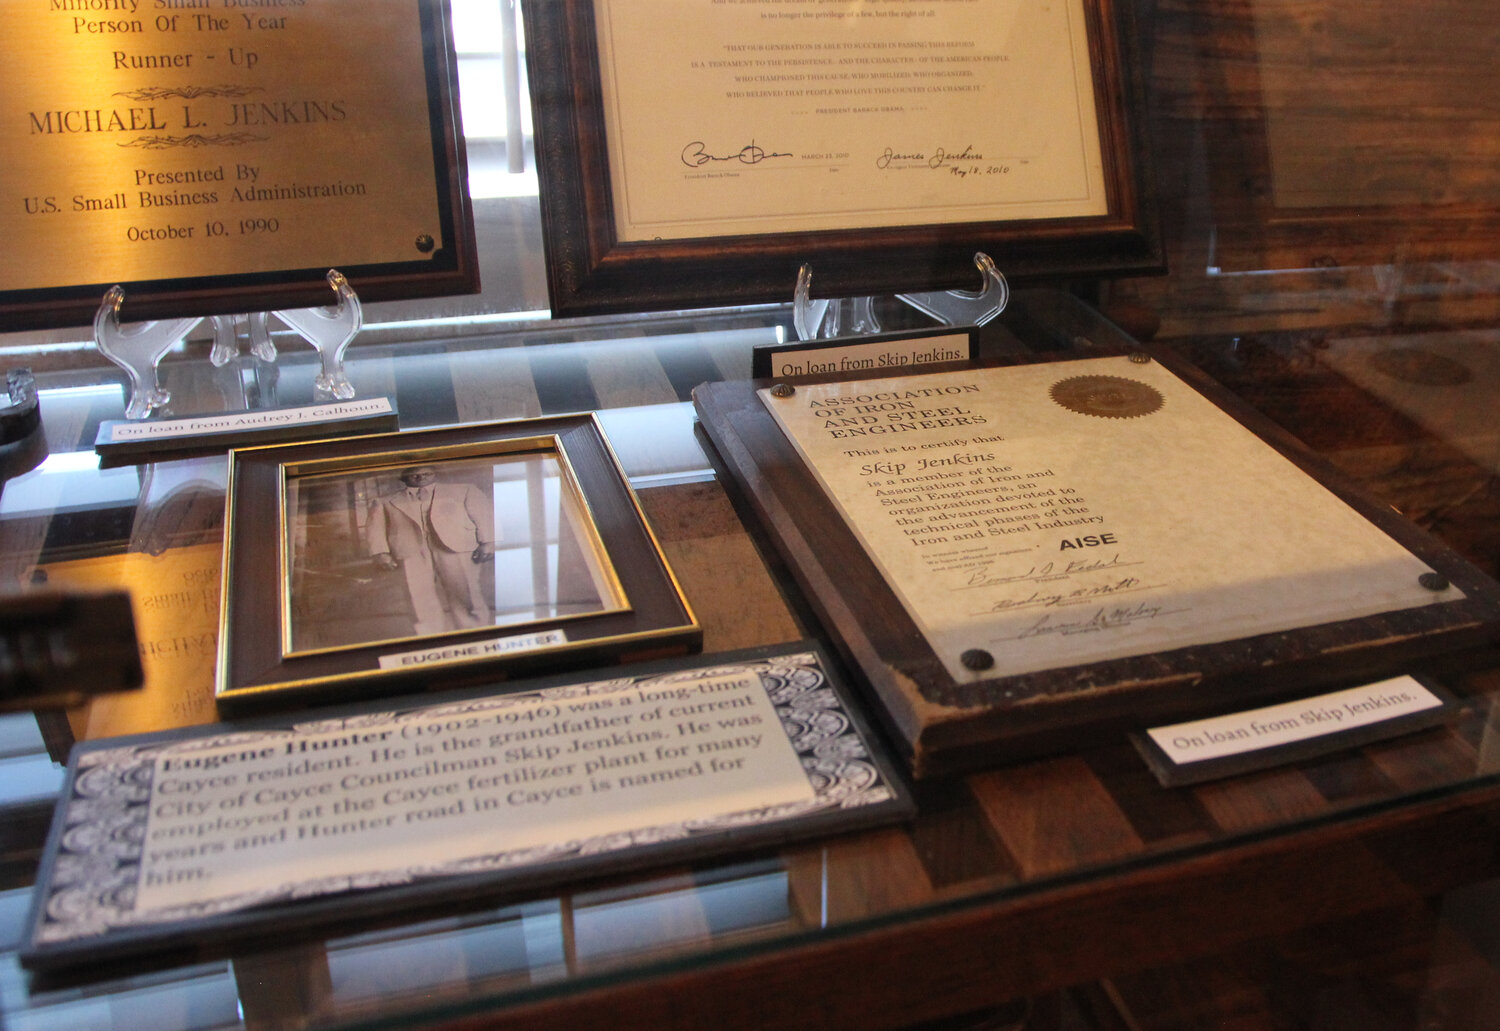 The Cayce Historical Museum’s “African American Legends of Cayce” exhibit includes various items contributed by the community.